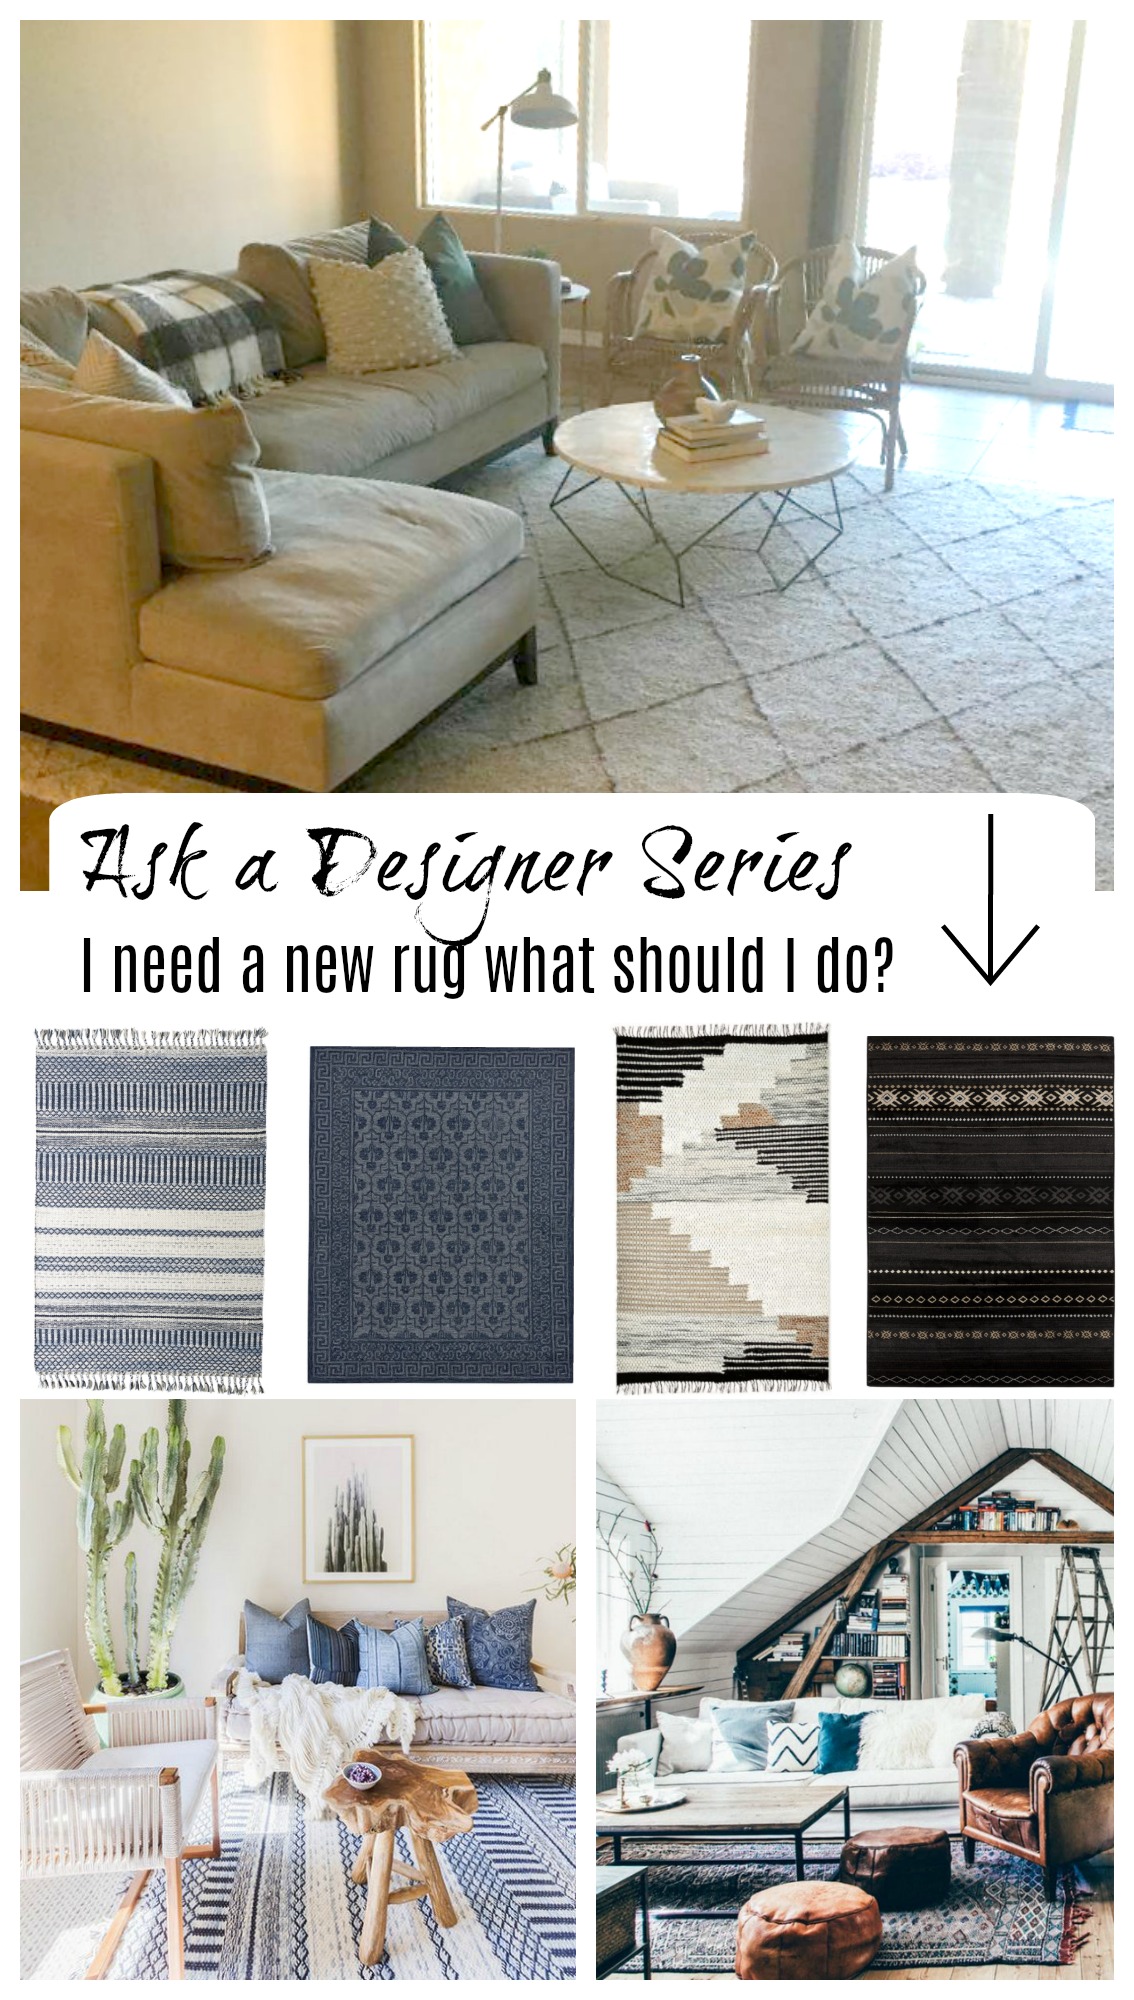 Ask a Designer- What Rug should I do in here?